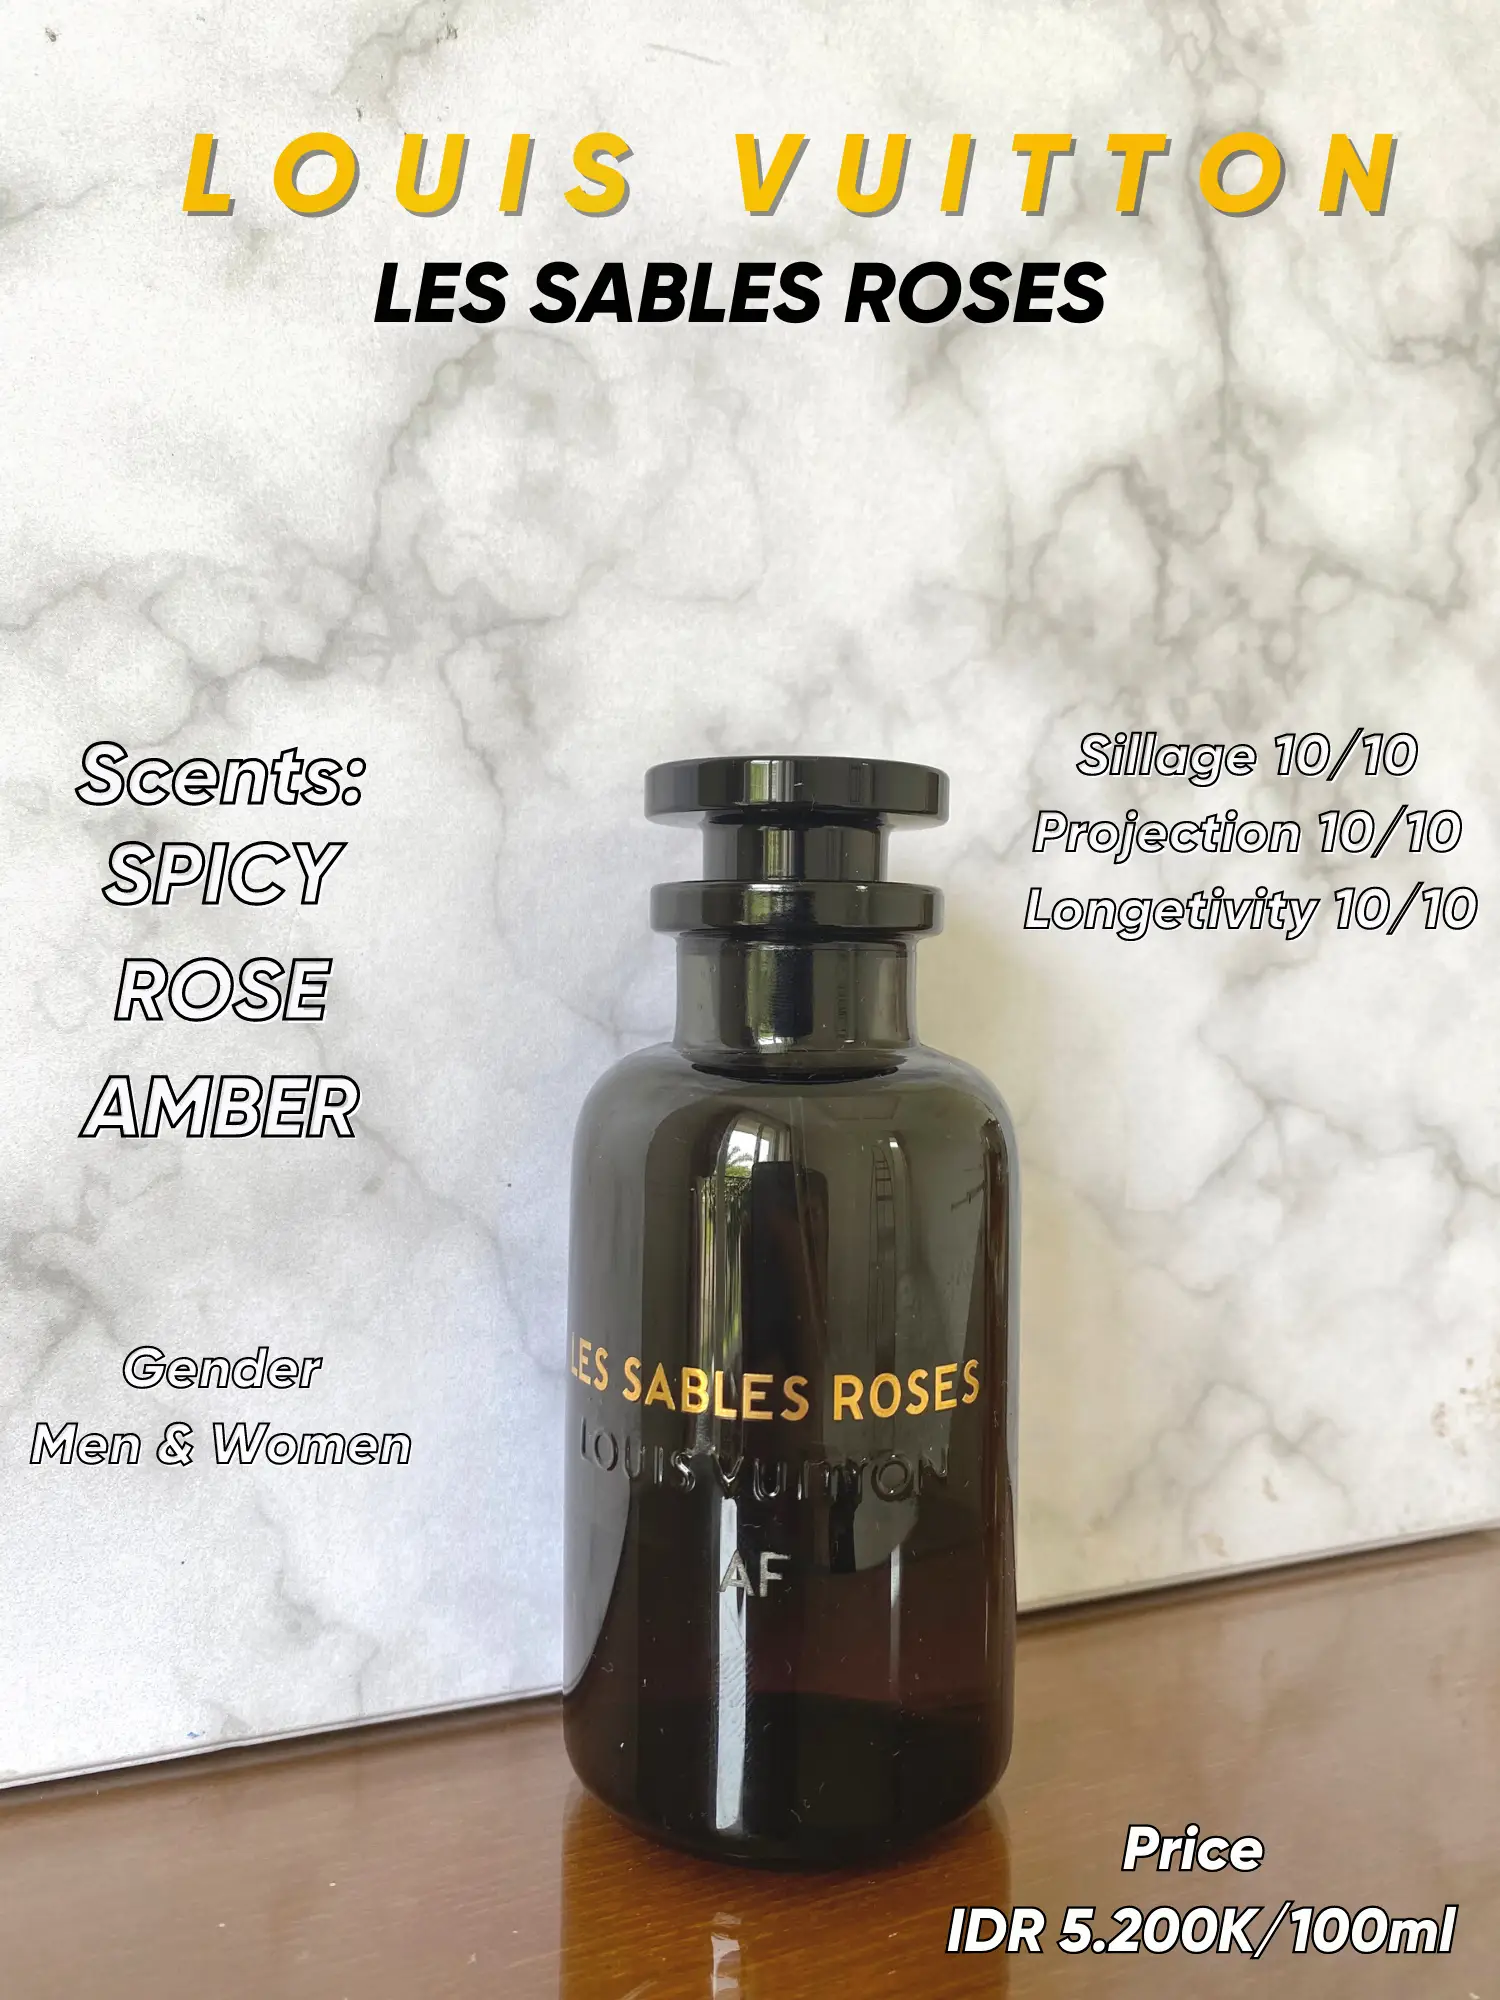 PERFUME TOK TI . Les Sable Roses by Louis Vuitton is amber floral